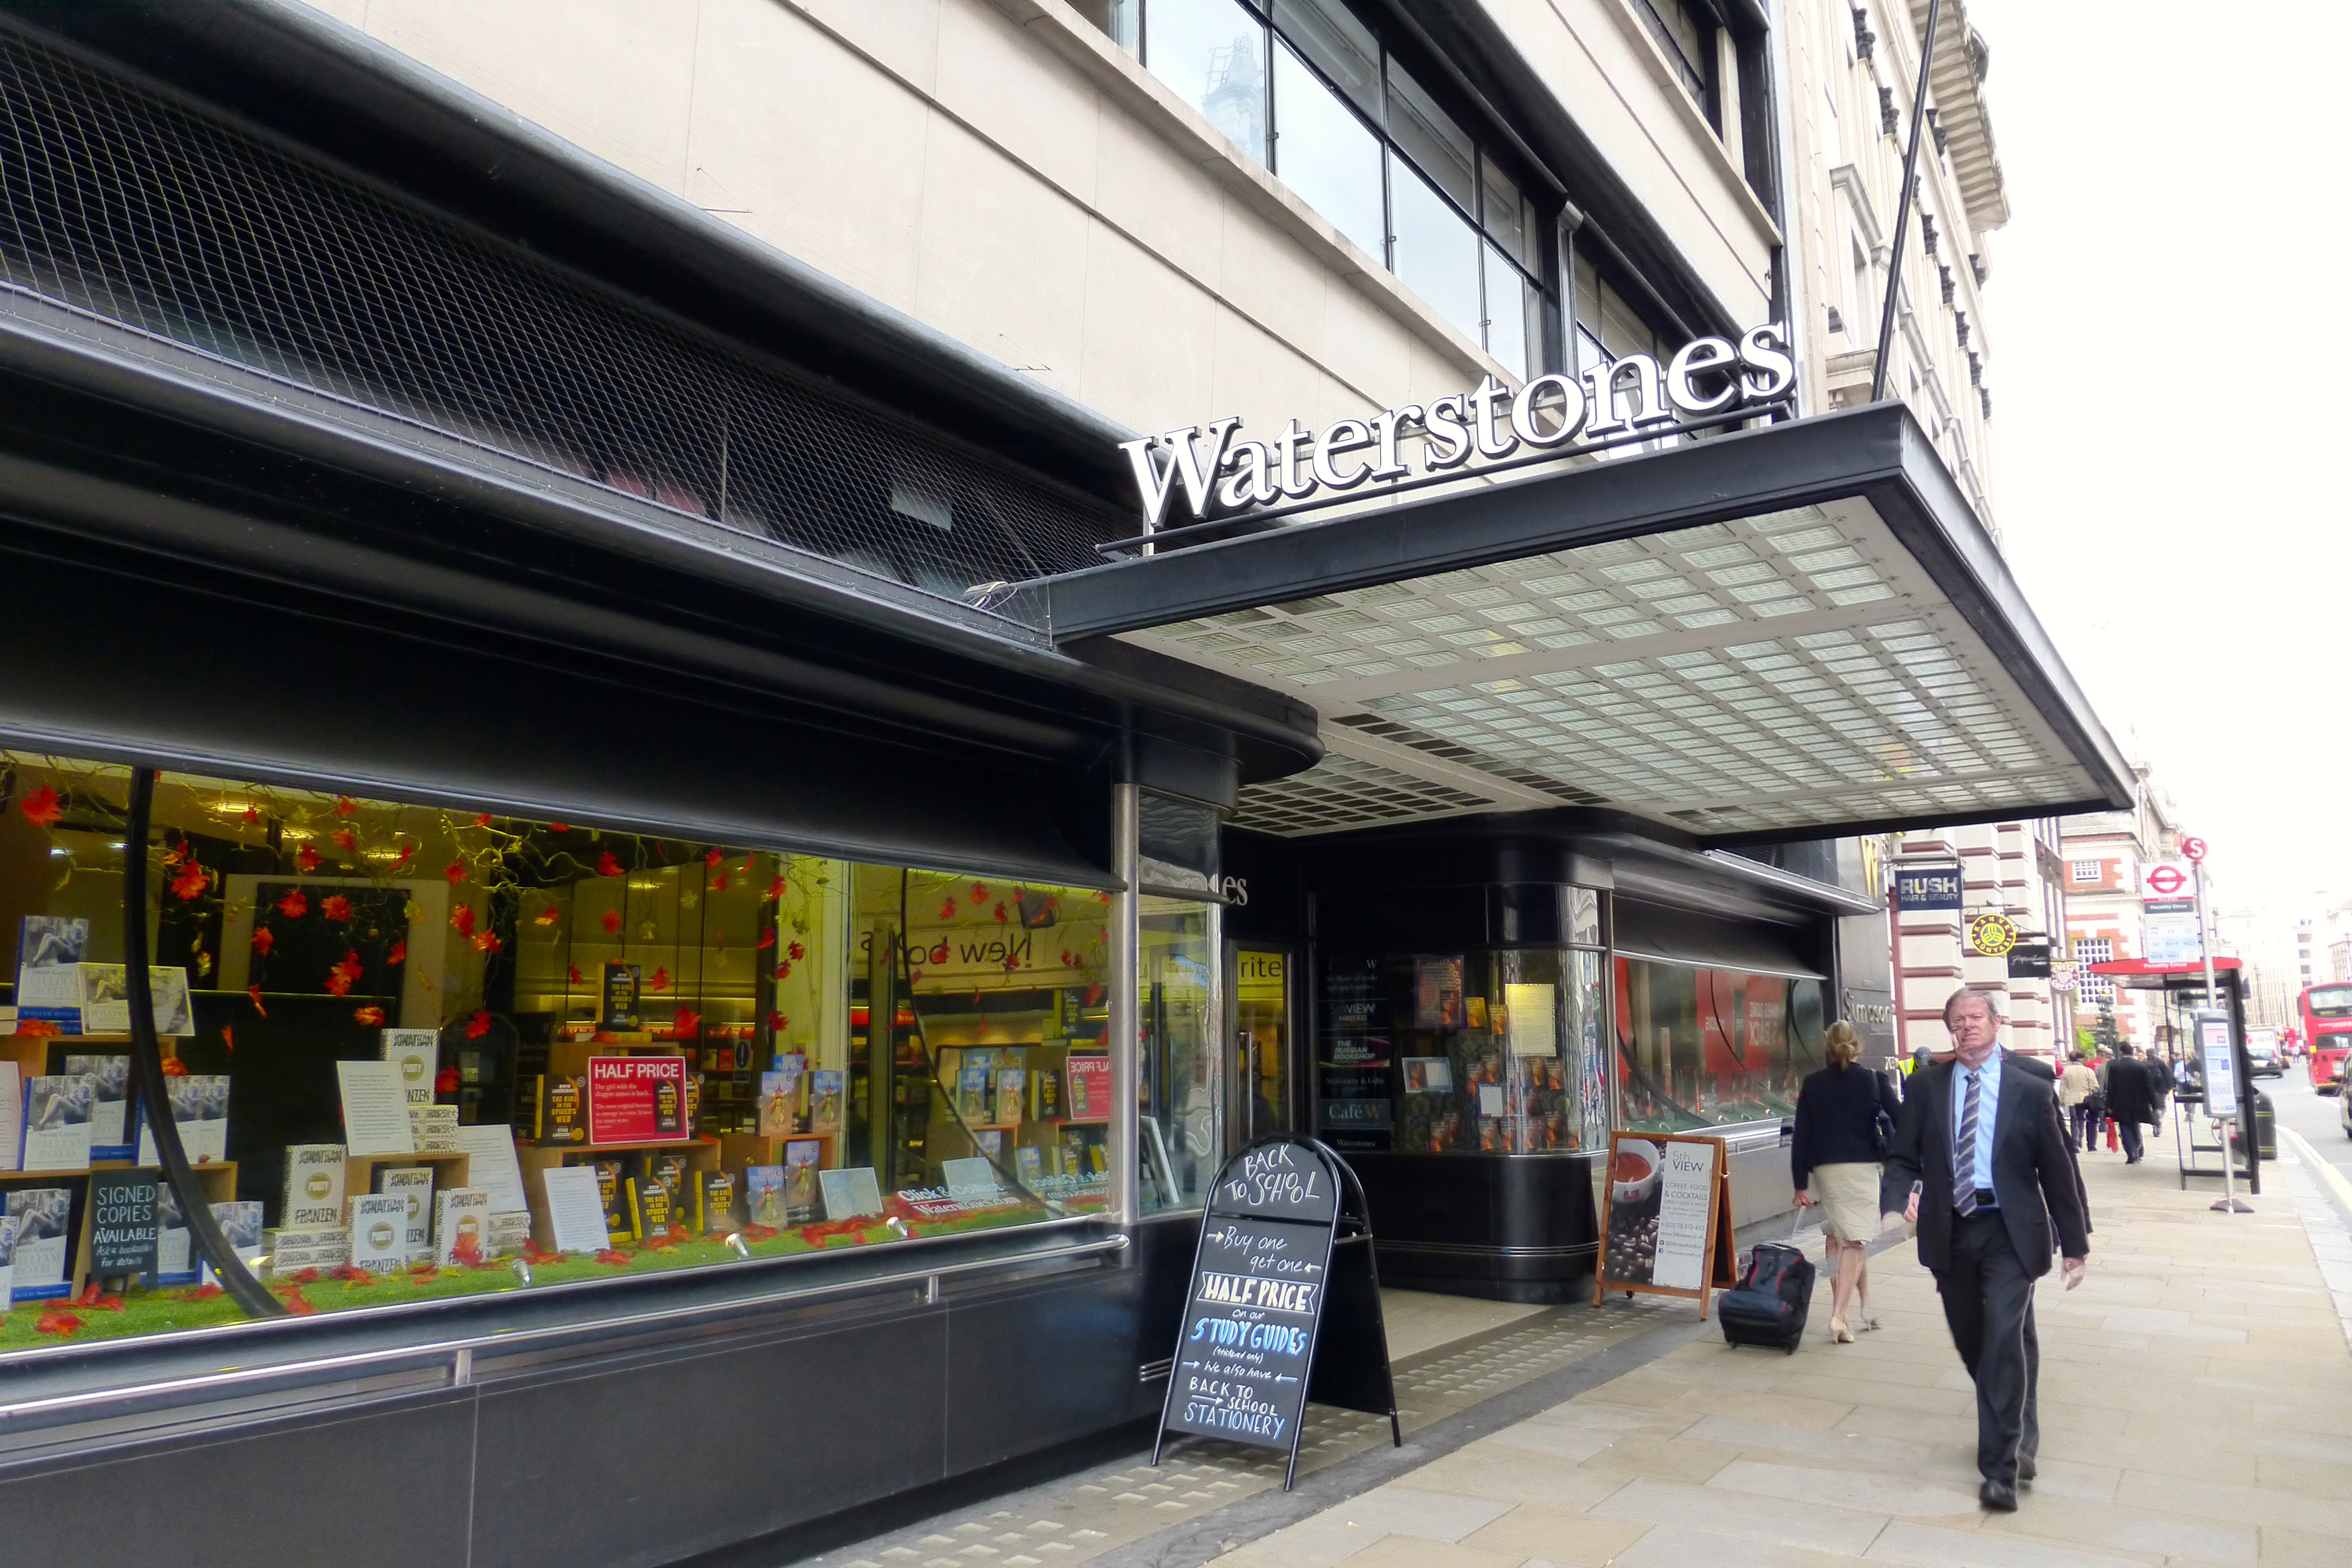 Above: There was some early Christmas shopping in Waterstones for Christmas cards and wrap.